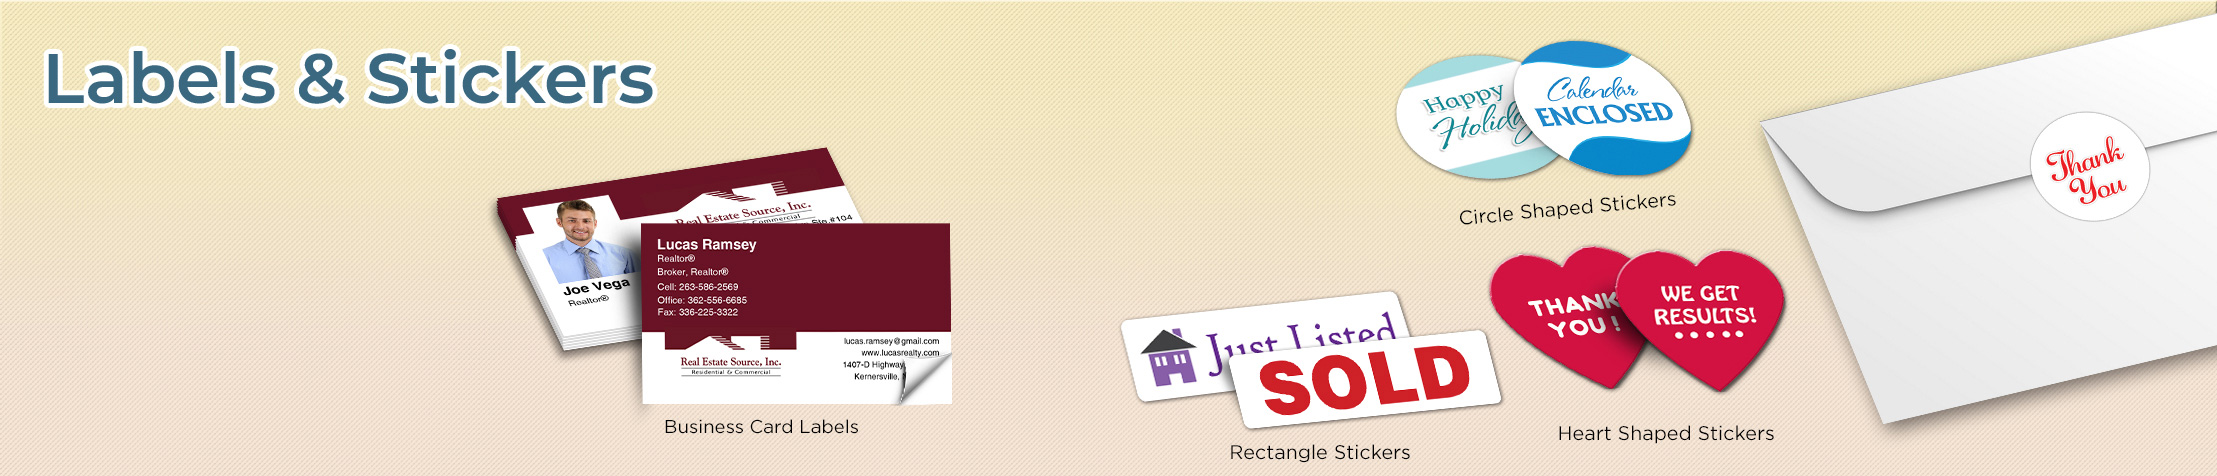 Real Estate Source Real Estate Labels and Stickers - Real Estate Source business card labels, return address labels, shipping labels, and assorted stickers | BestPrintBuy.com